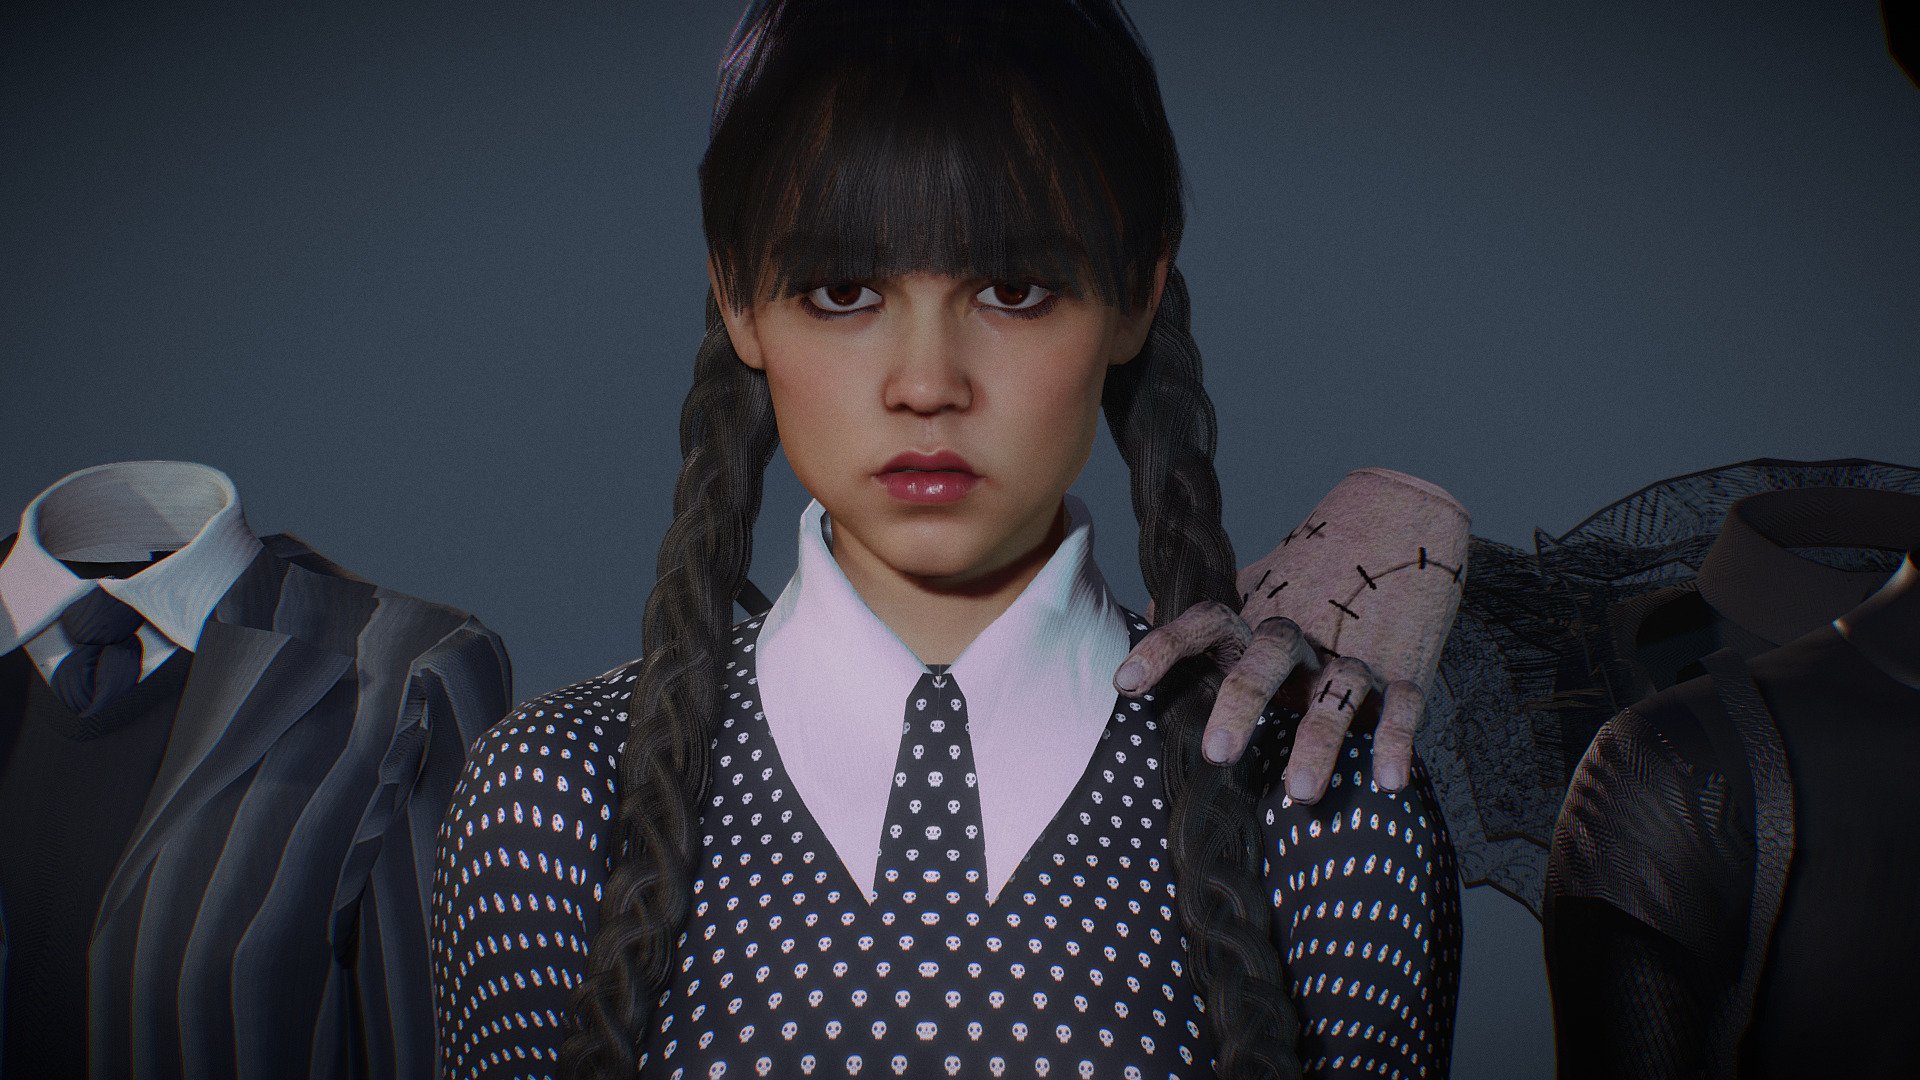 * PLEASE DOWNLOAD THE RAR INSIDE THE ADDITIONAL FILES!!!
Wednesday Addams with 4 outfits. Model in Blender file. Fully rigged. SSS subsurface scattering. mixamo bone names for animation. 





Includes 4 different costumes. Shaders inside the additional RAR file.




Exporting the FBX for mixamo: 






Transform tab: check &ldquo;apply transform